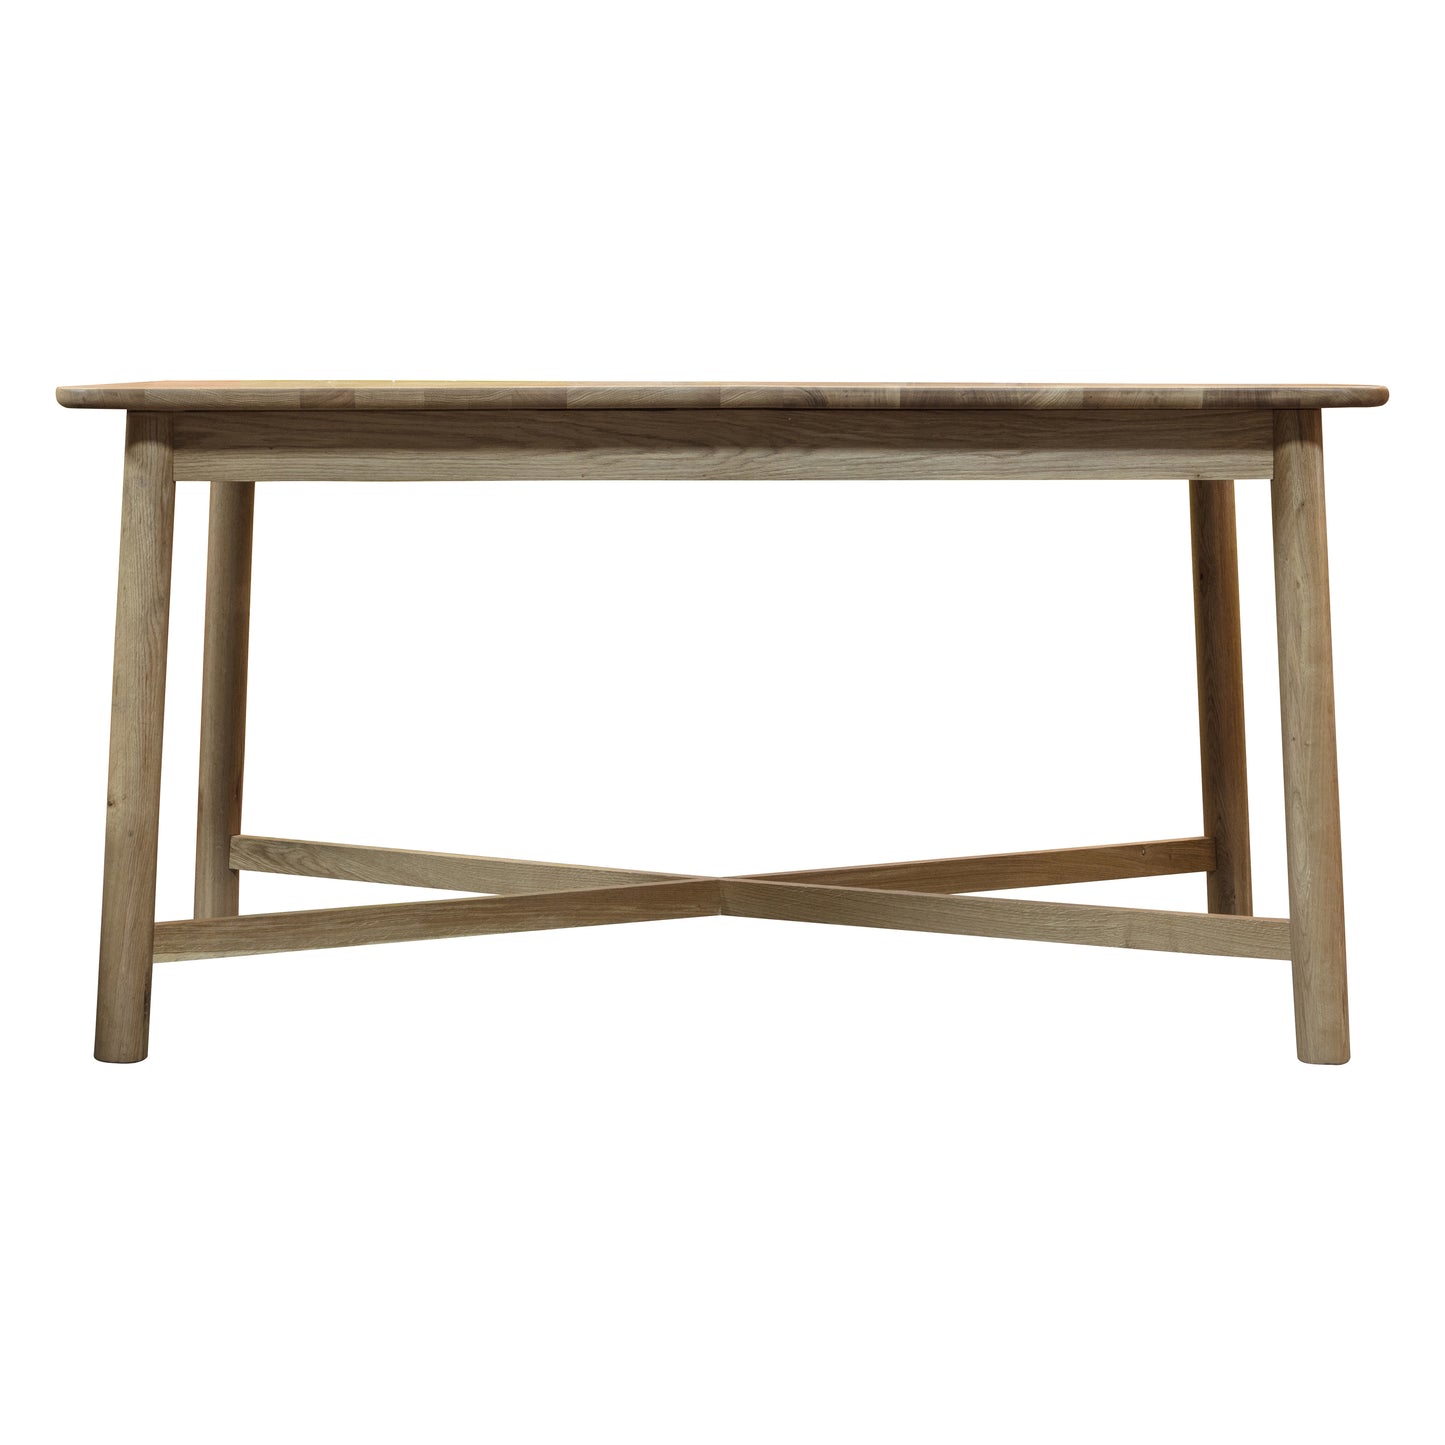 A cross leg Wembury Dining Table for home interior decor by Kikiathome.co.uk.